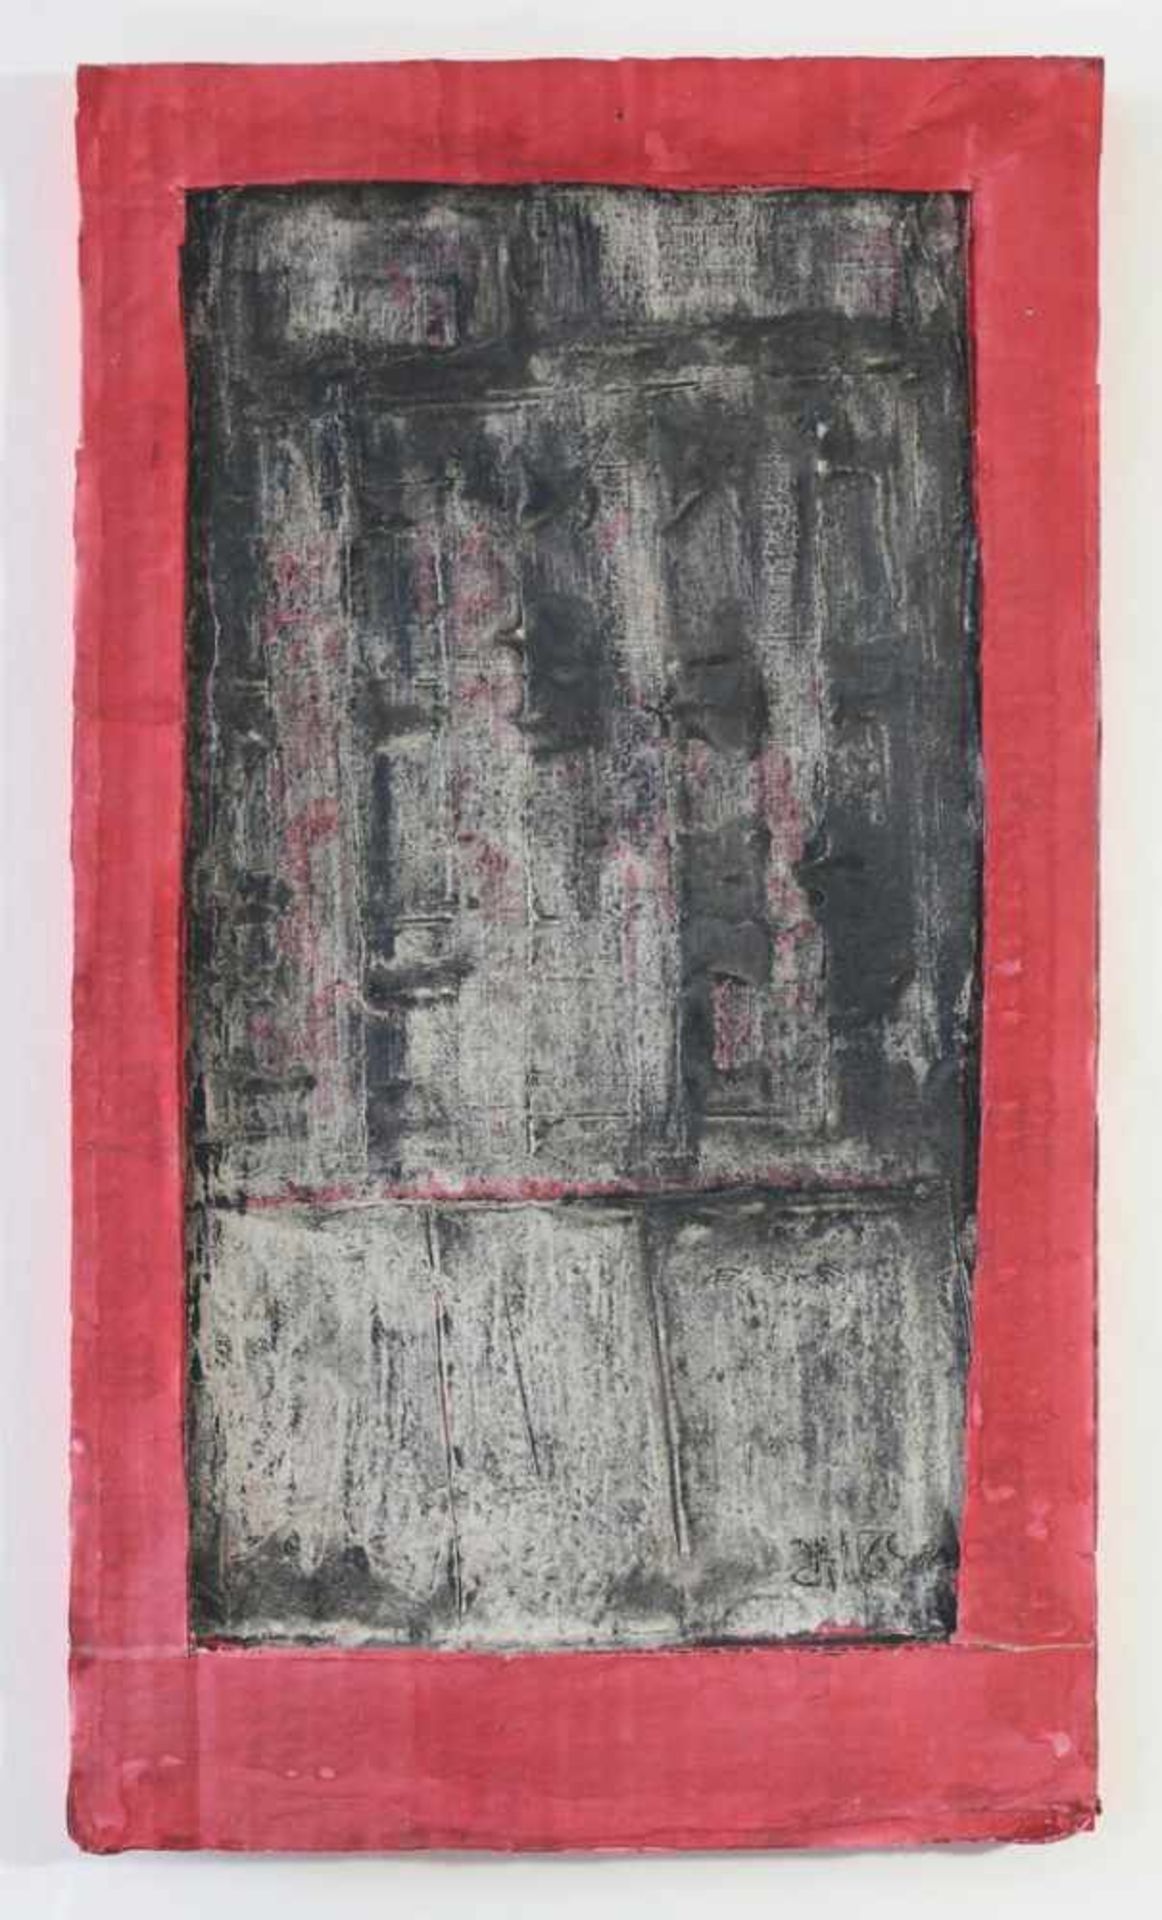 Herbert Zangs*, (1924-2003)1960Expansion. Relief painting. 1960. Farbe und Pigment auf Leinwand,